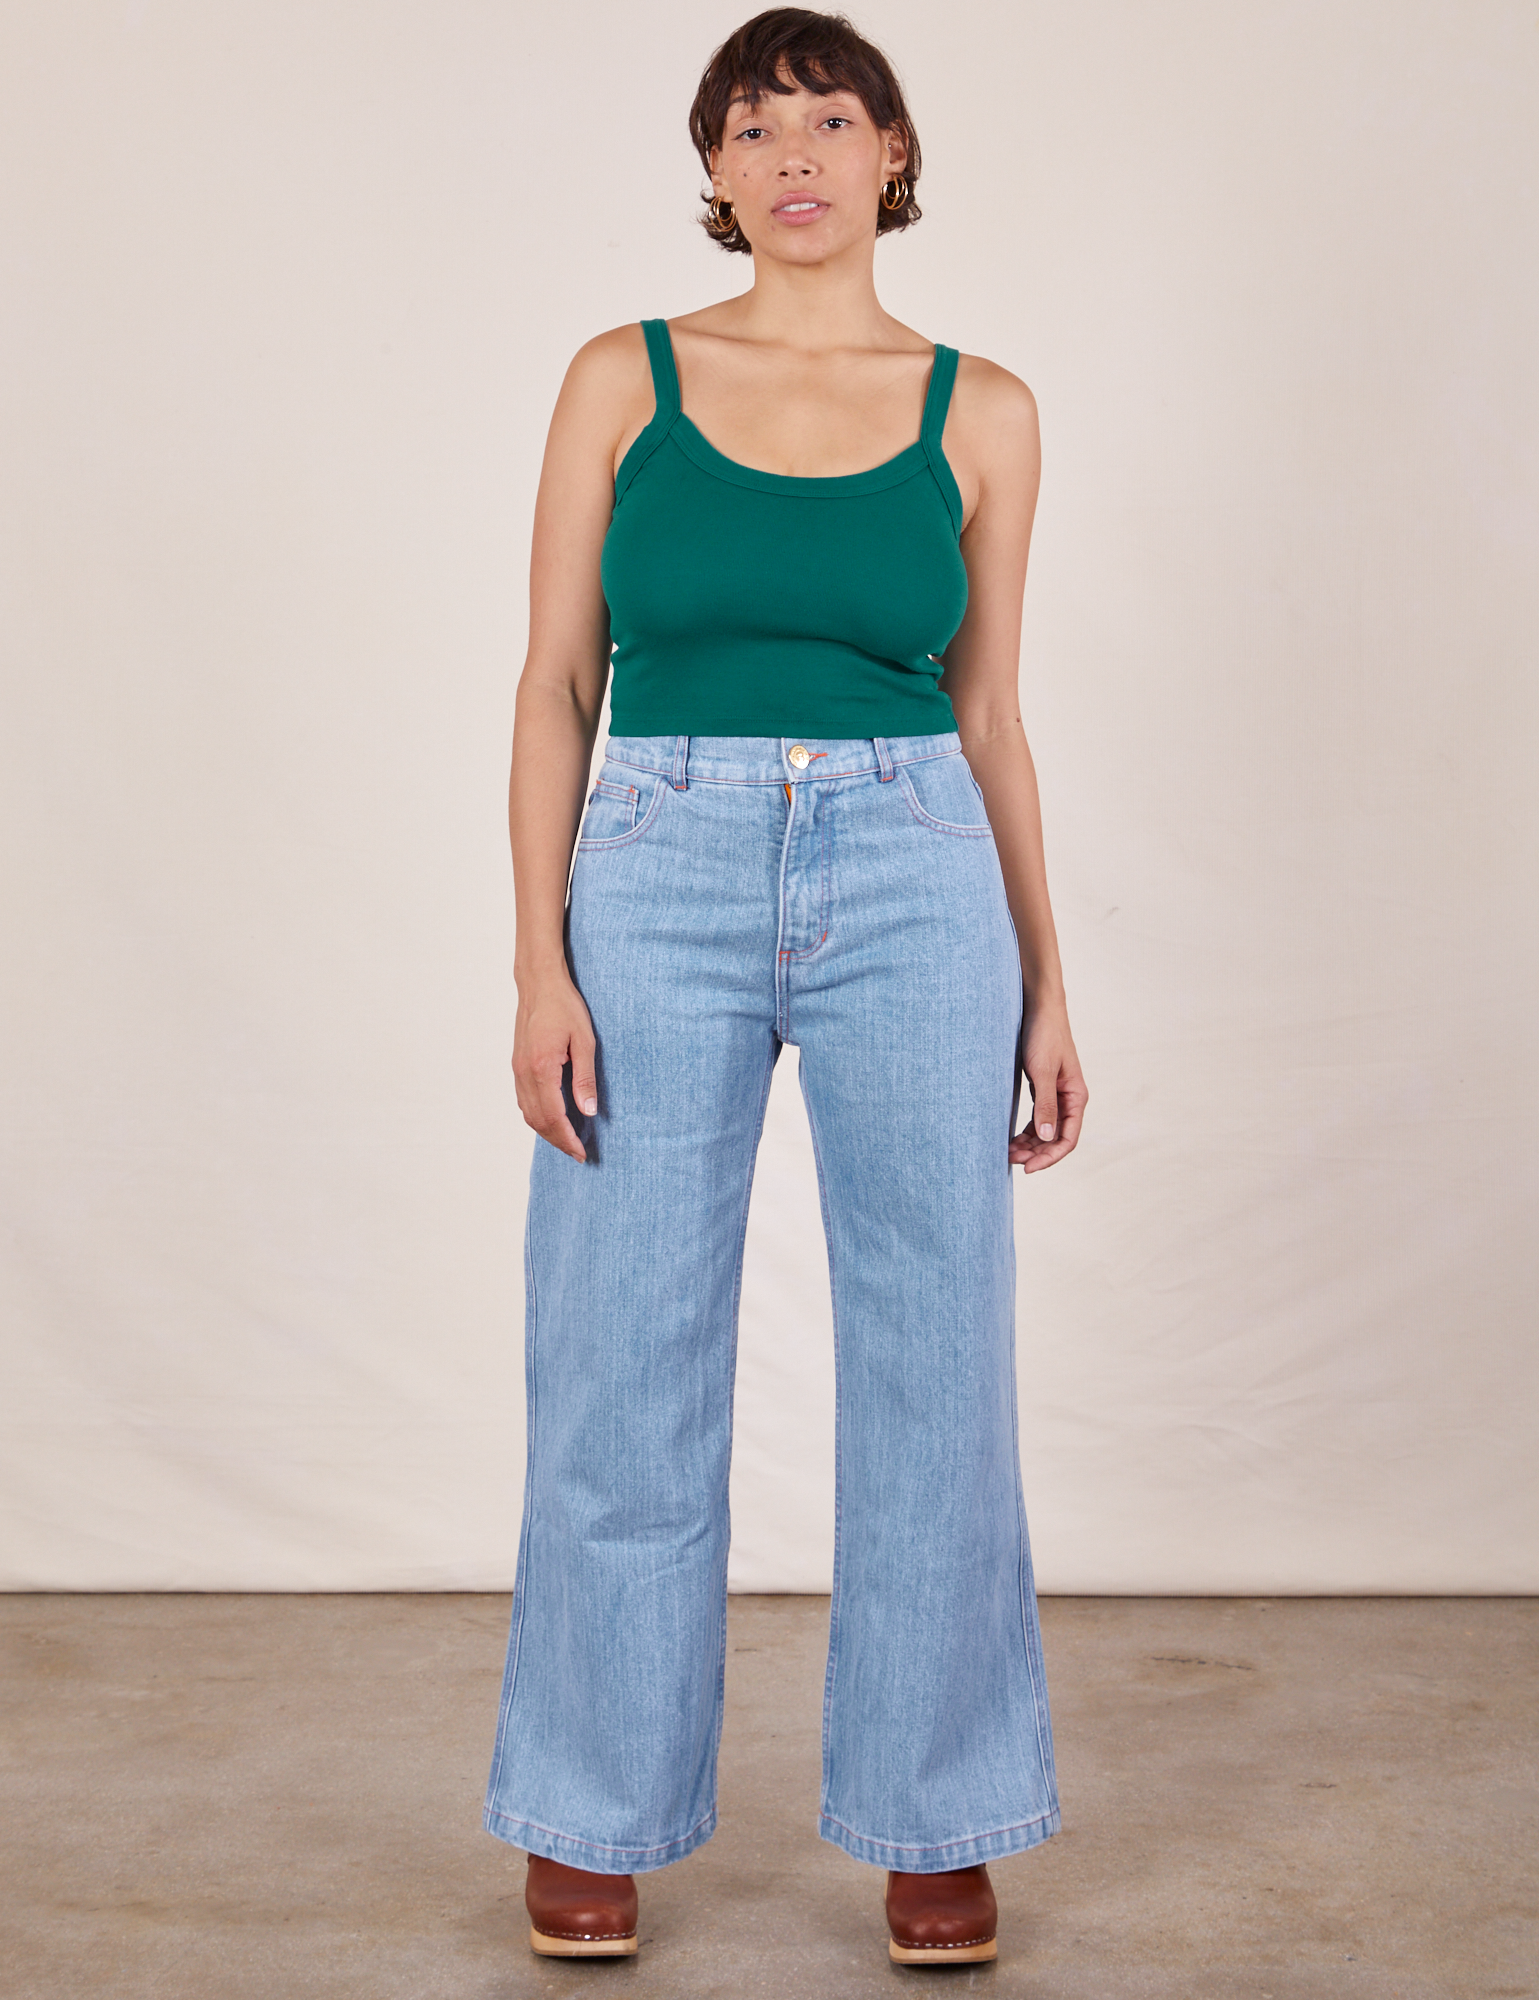 Tiara is wearing Cropped Cami in Hunter Green and light wash Sailor Jeans